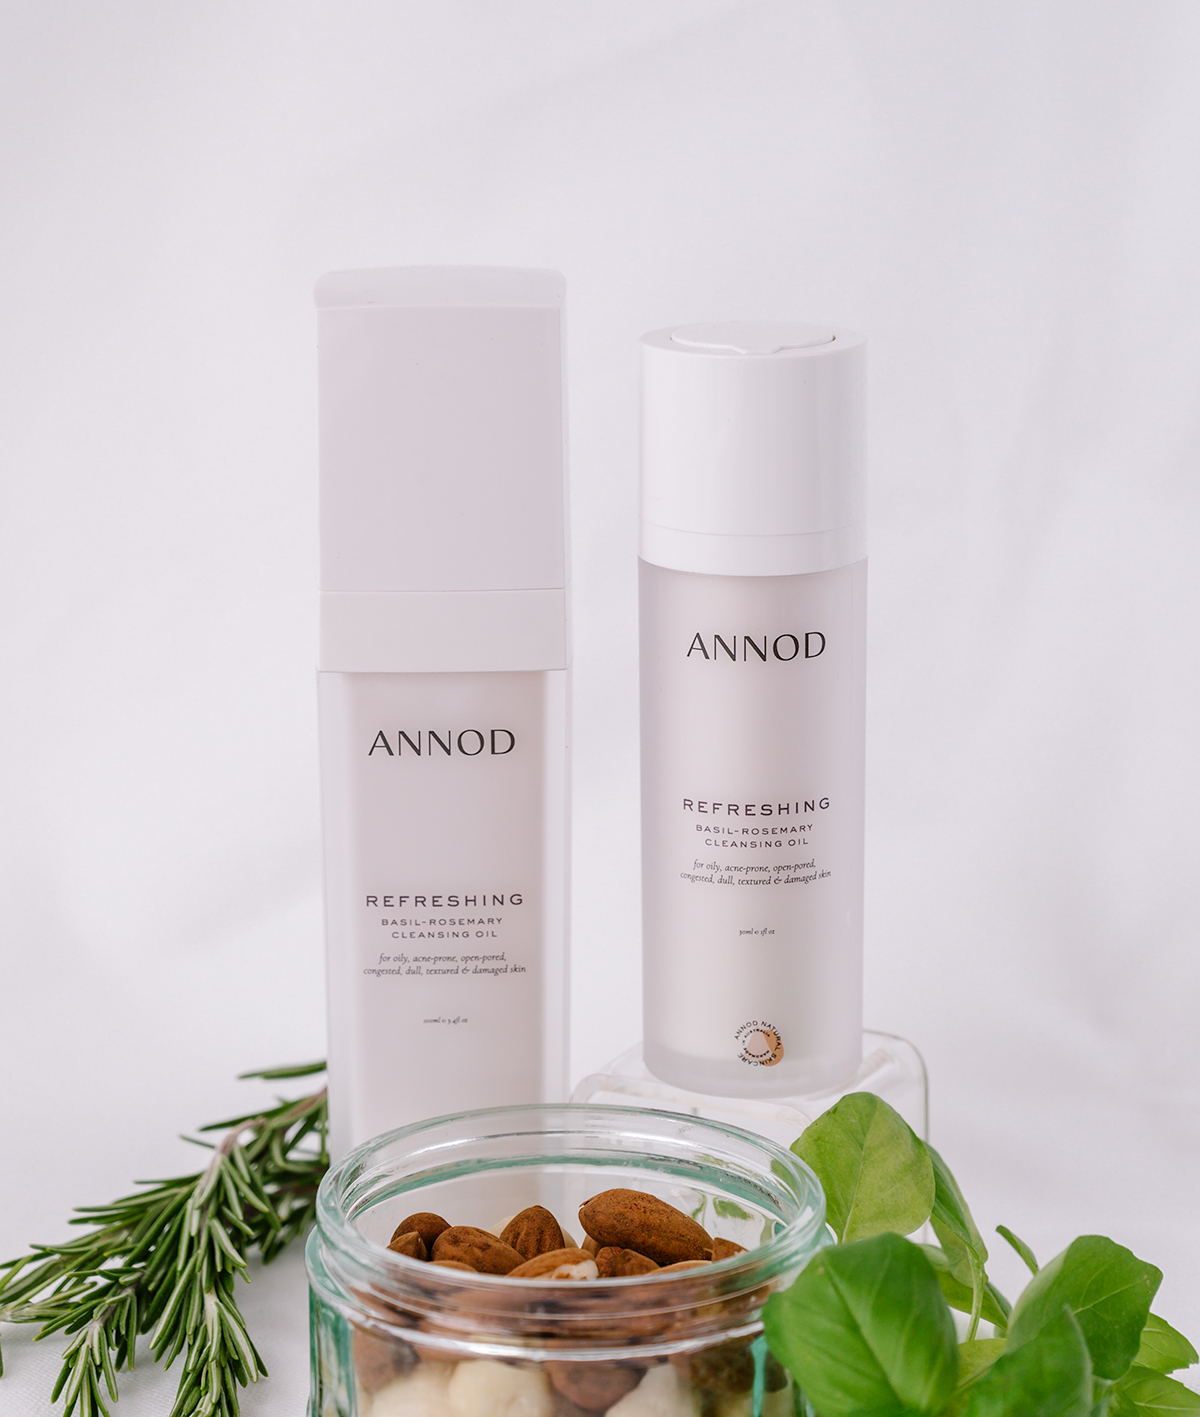 A set consisting a 30 ml and 100ml of Refreshing Basil- Rosemary Cleansing Oil with natural leaves of basil and rosemary